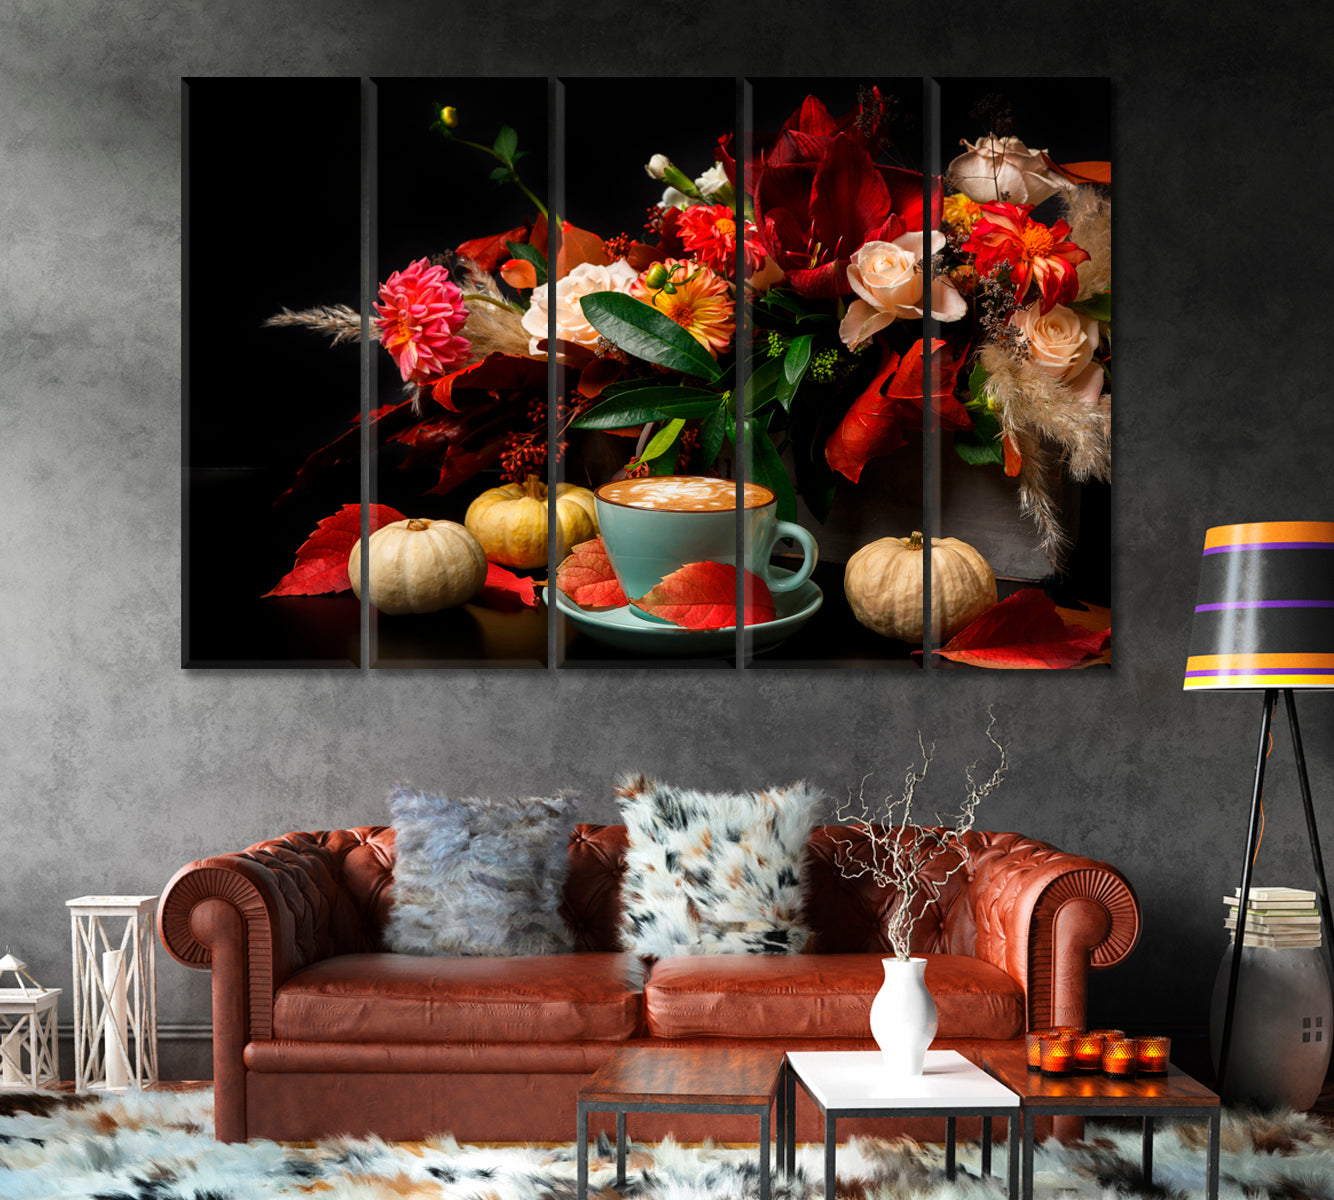 Still Life with Coffee and Flowers Canvas Print-Canvas Print-CetArt-1 Panel-24x16 inches-CetArt